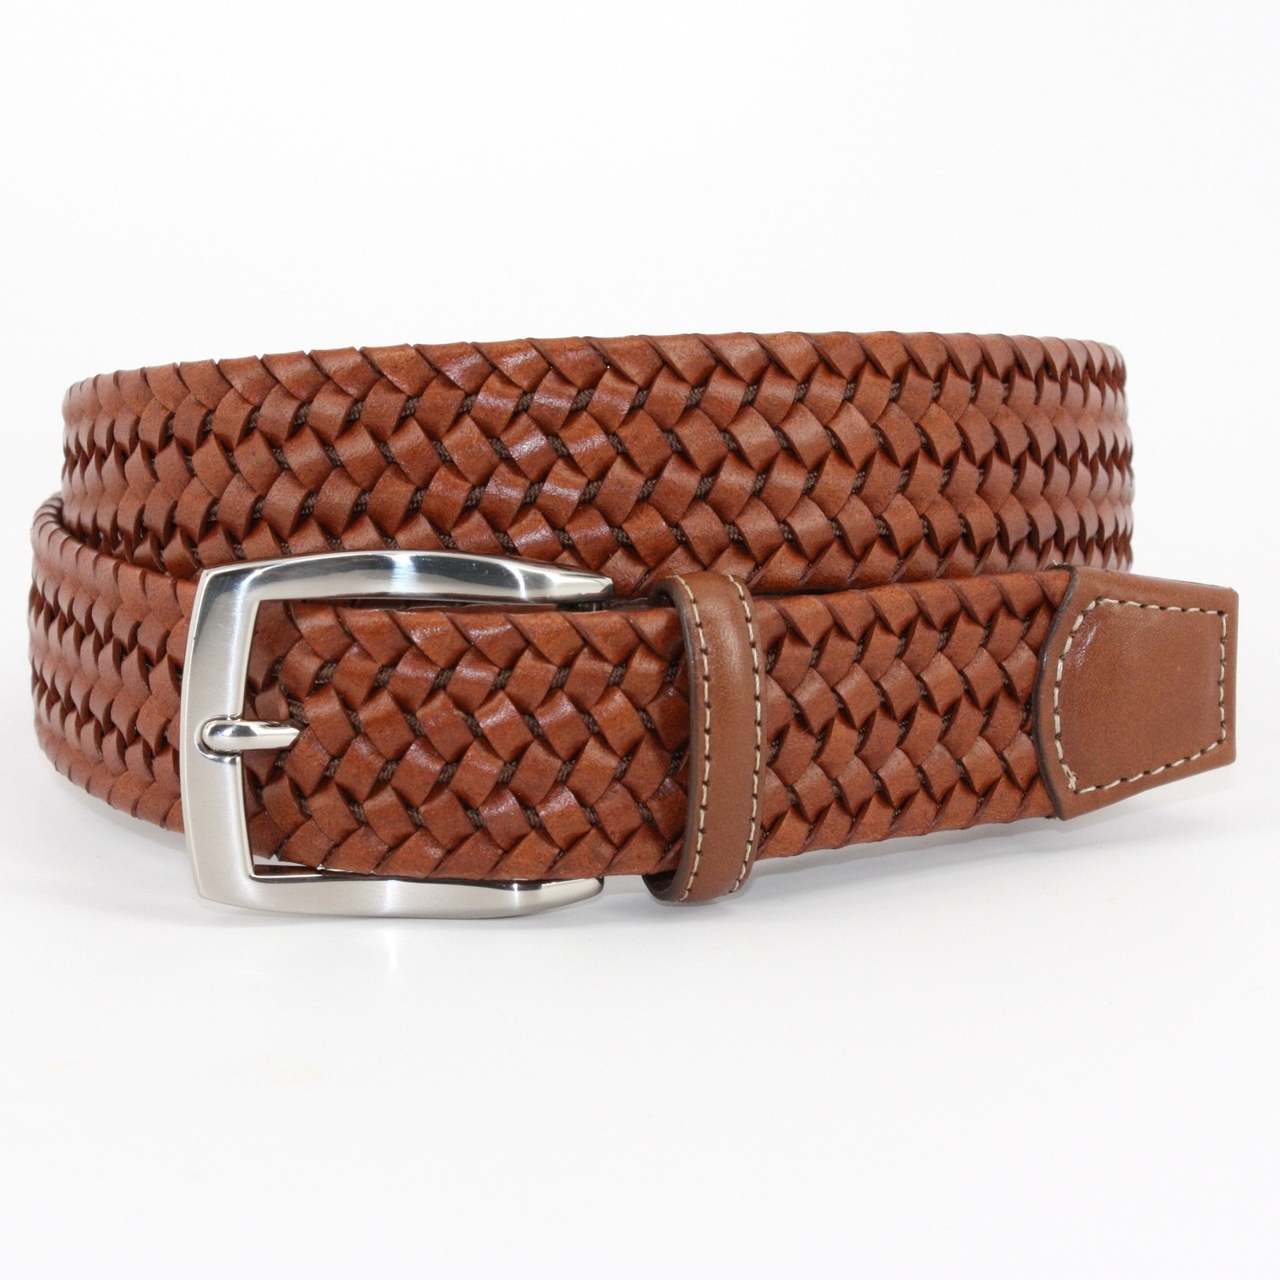 Italian Woven Stretch Leather Belt in Cognac by Torino Leather Co